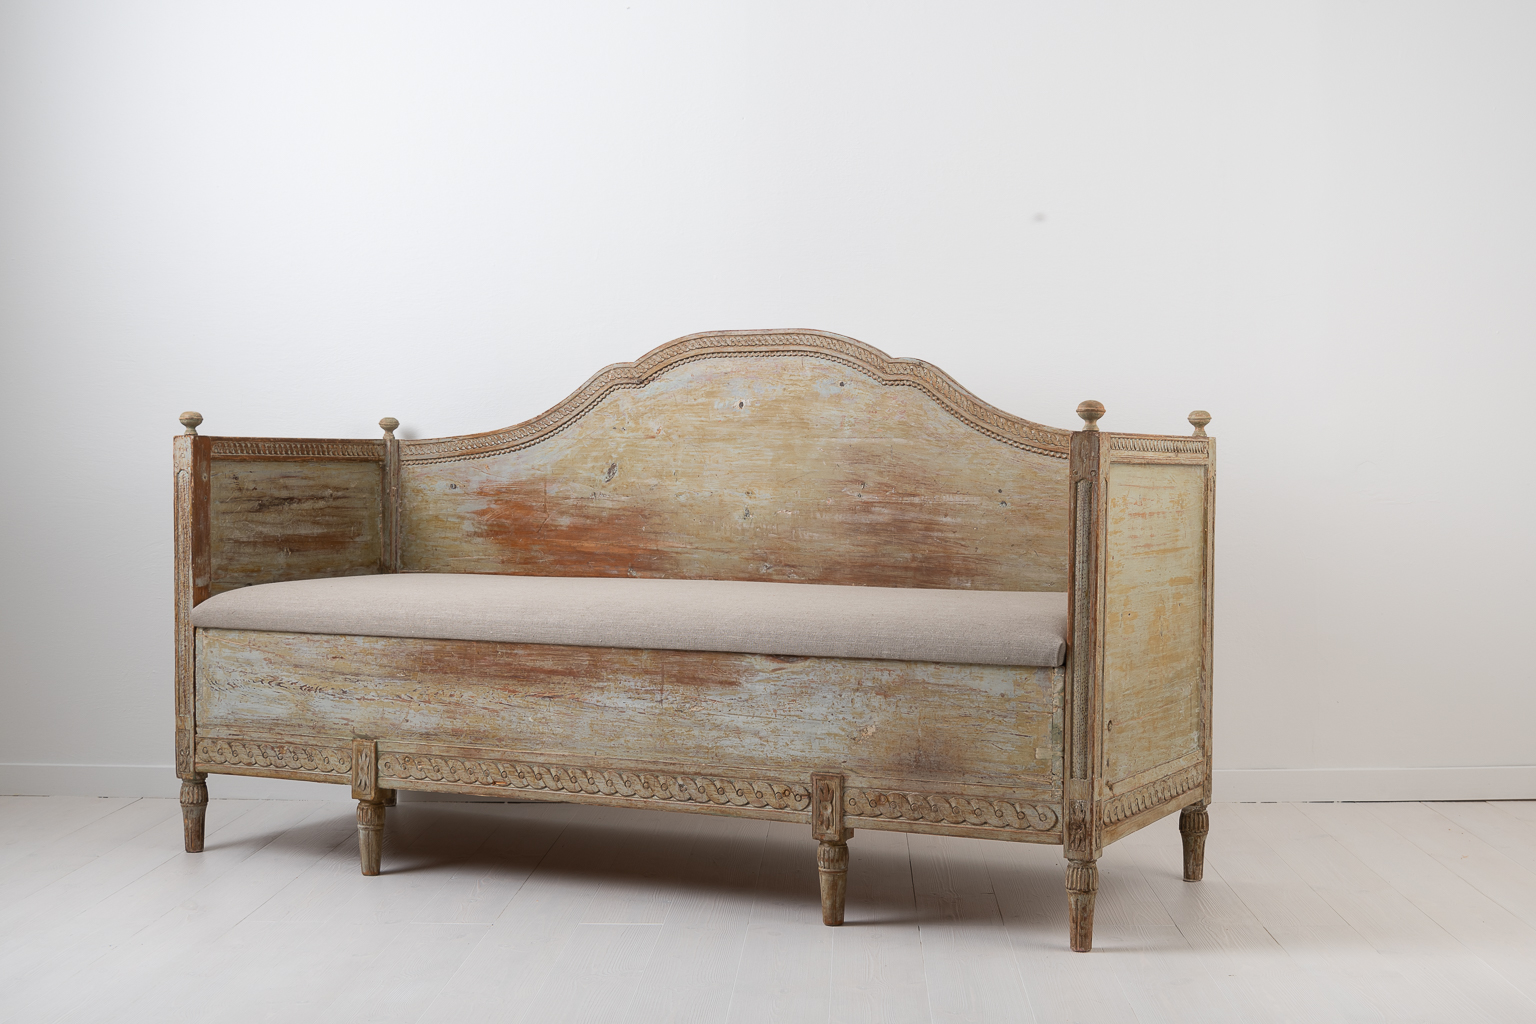 Gustavian bench from the 18th century. The bench or sofa is Swedish gustavian which corresponds to the more international neoclassical period